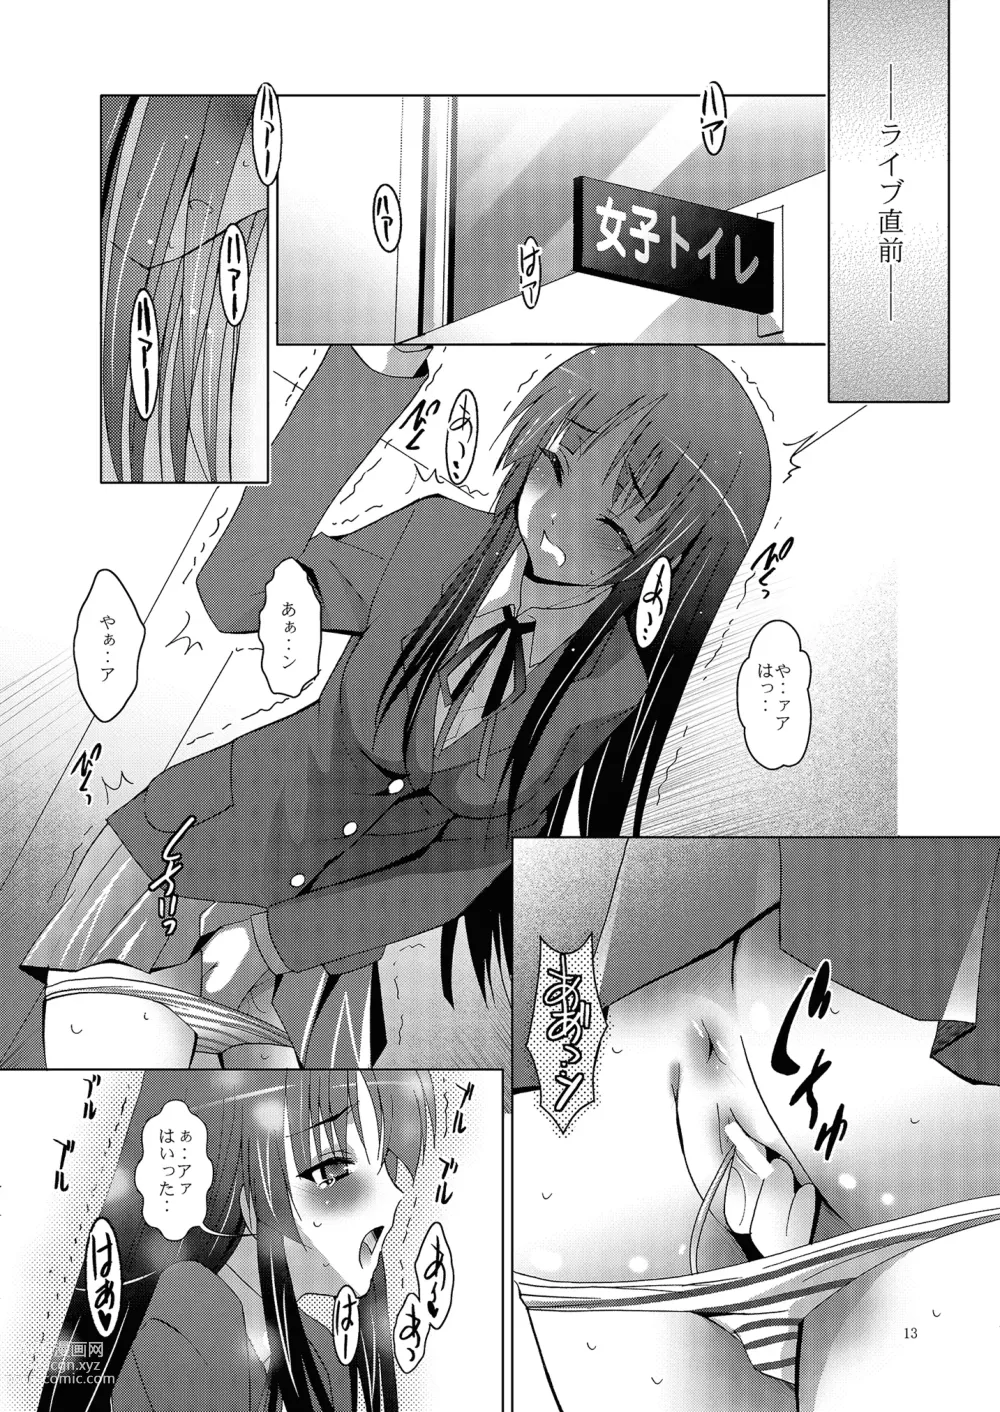 Page 13 of doujinshi MOUSOU THEATER 27